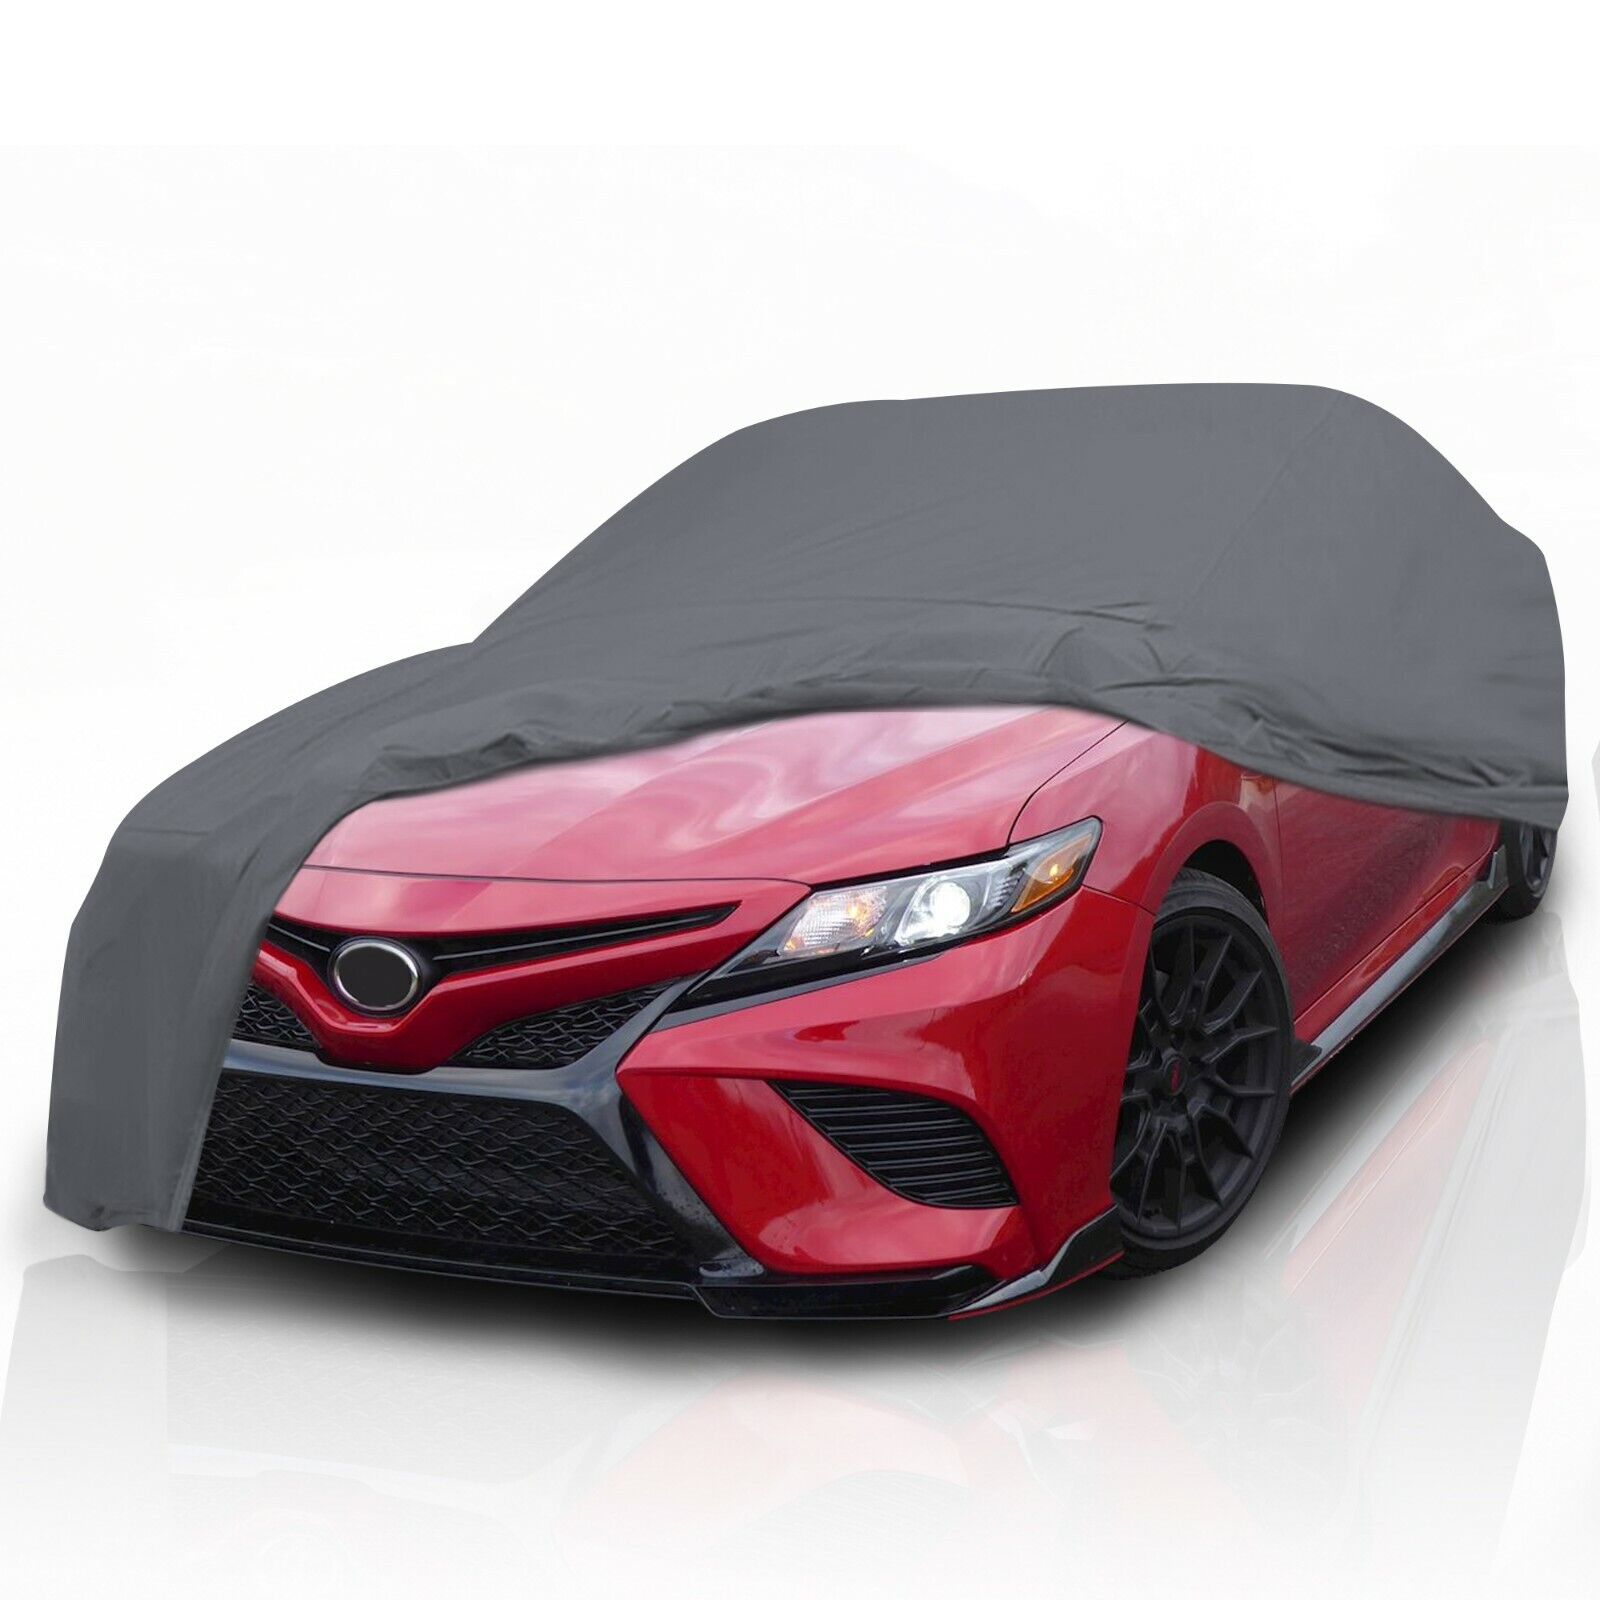 Challenge the lowest price of Japan ☆ CSC 4 Layer Water Resistant Car Cover Camry Toyota Protection OFFer 1983-1986 UV for